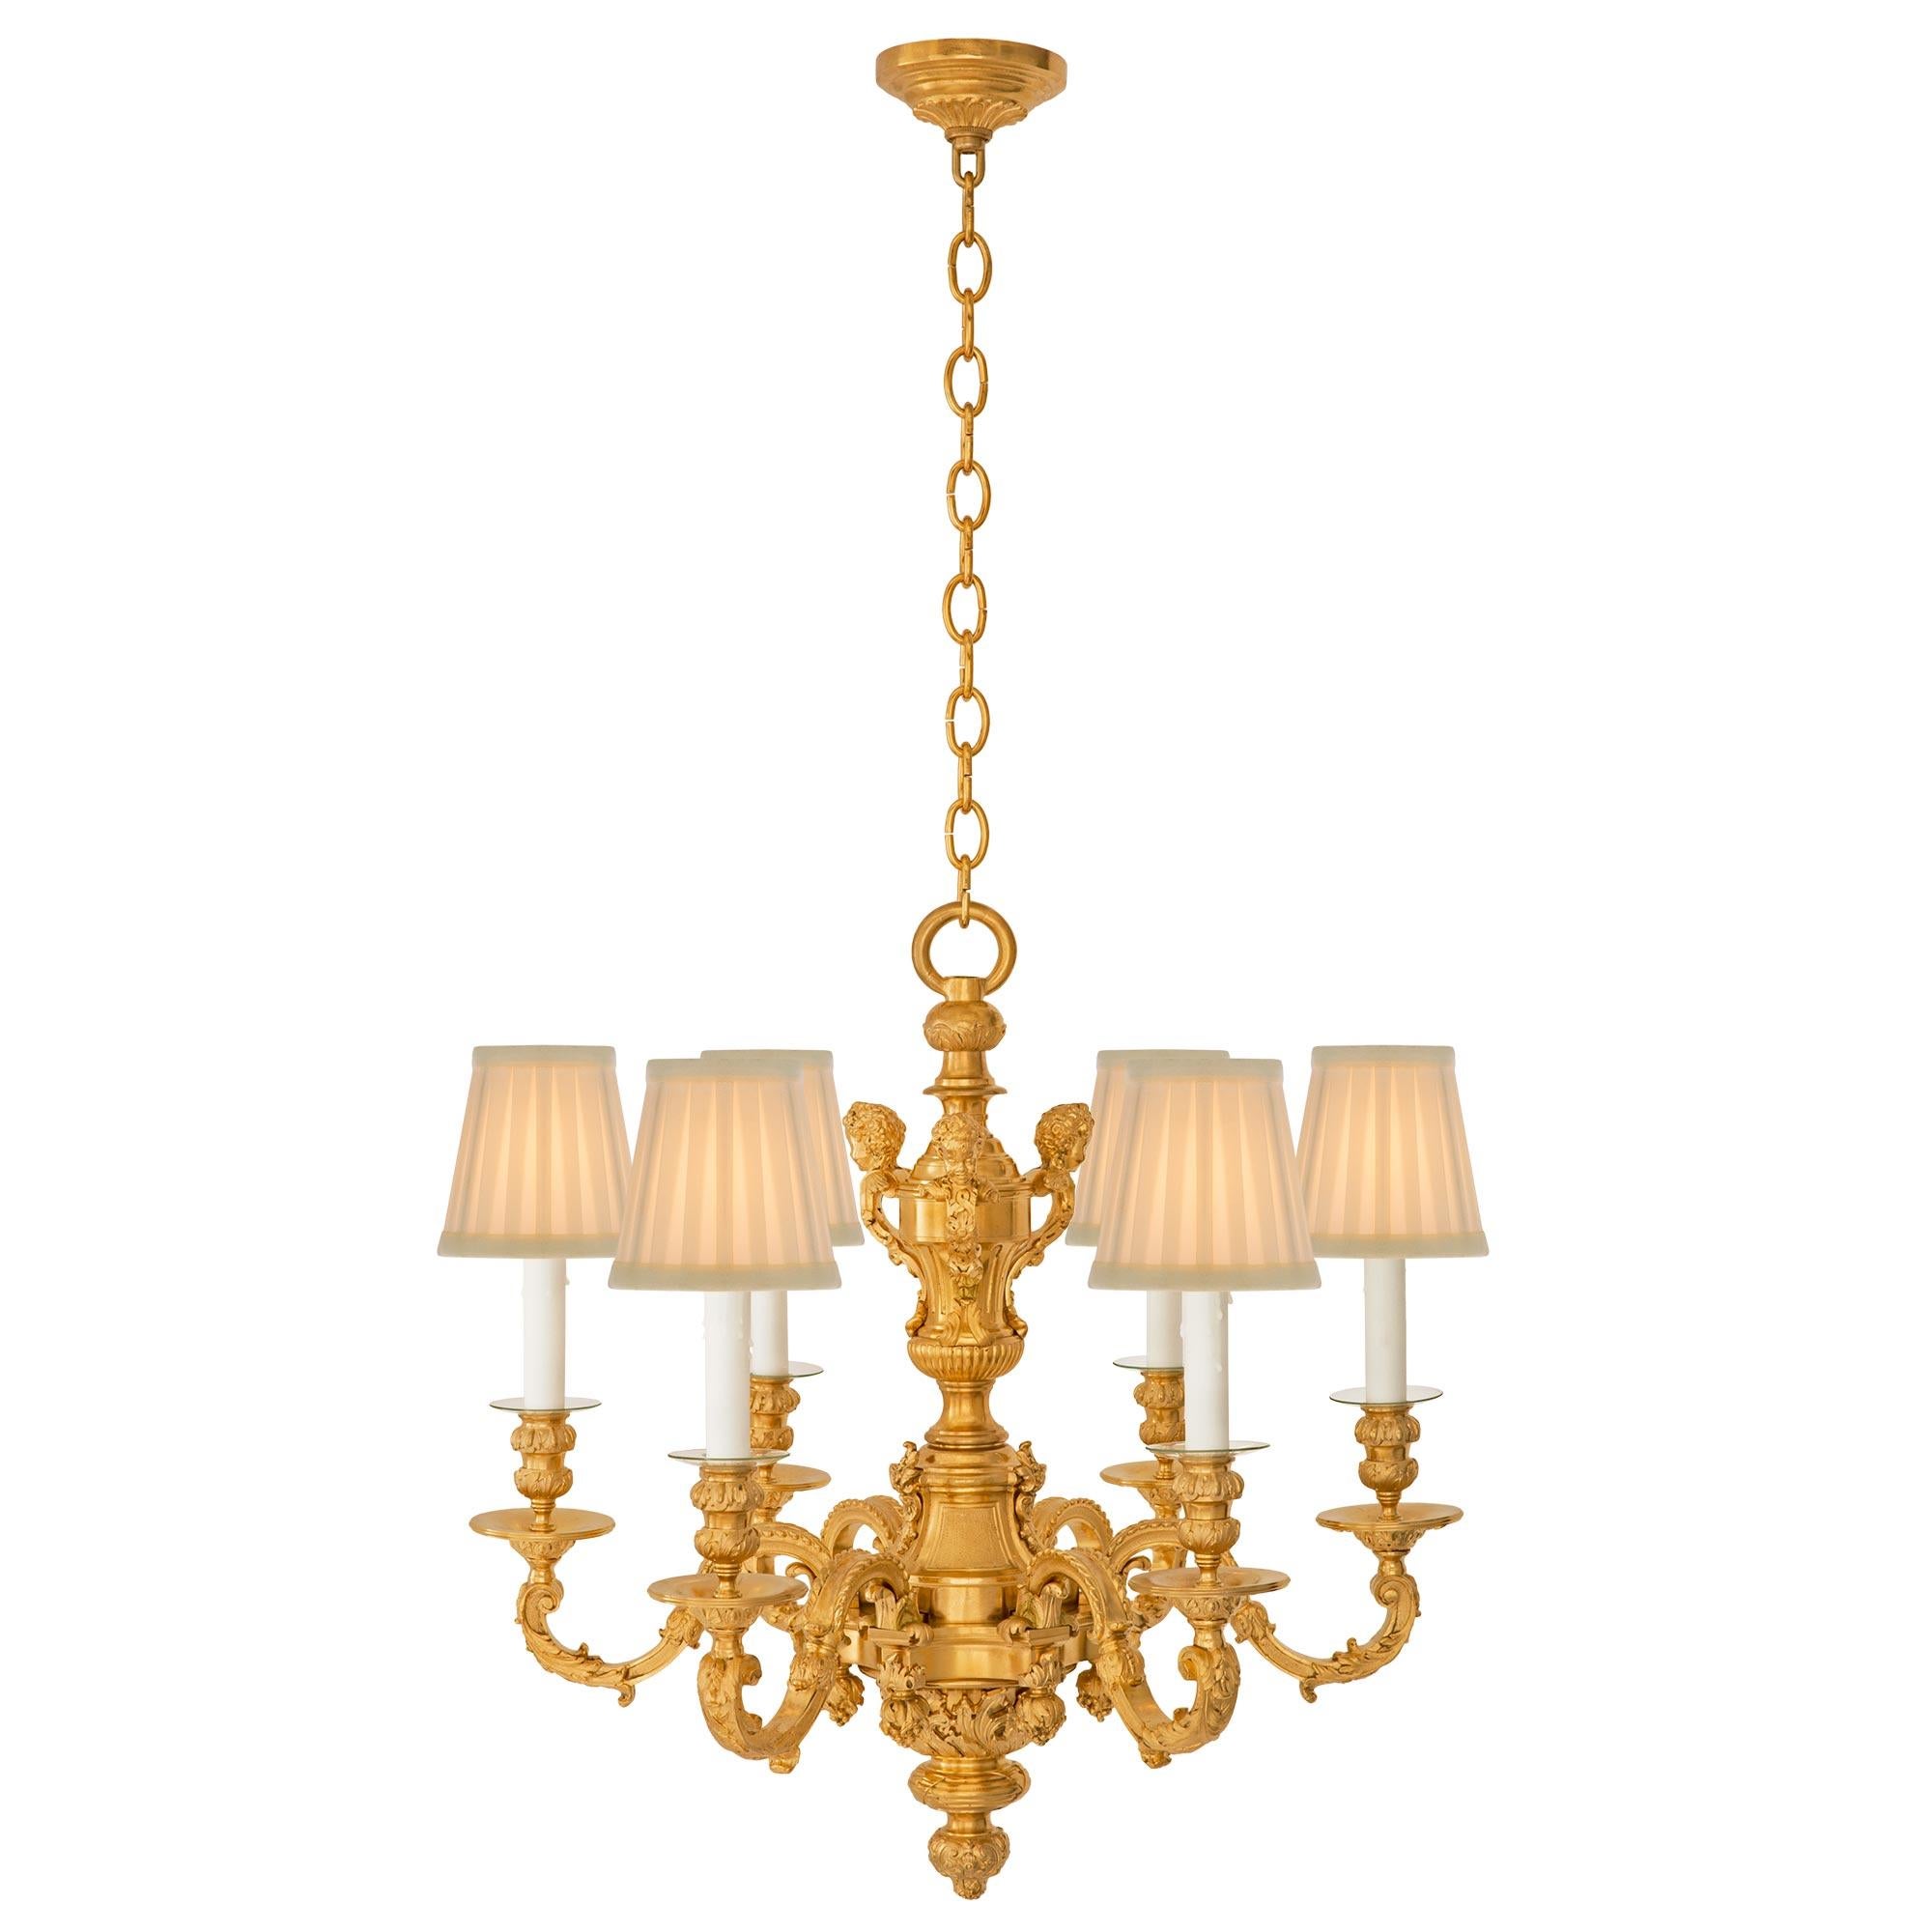 An exceptional French 19th century Louis XVI st. ormolu chandelier. The six arm chandelier is centered by a beautiful richly chased foliate finial below an elegant mottled tied reeded band and stunning foliate designs. Each scrolled arm displays a